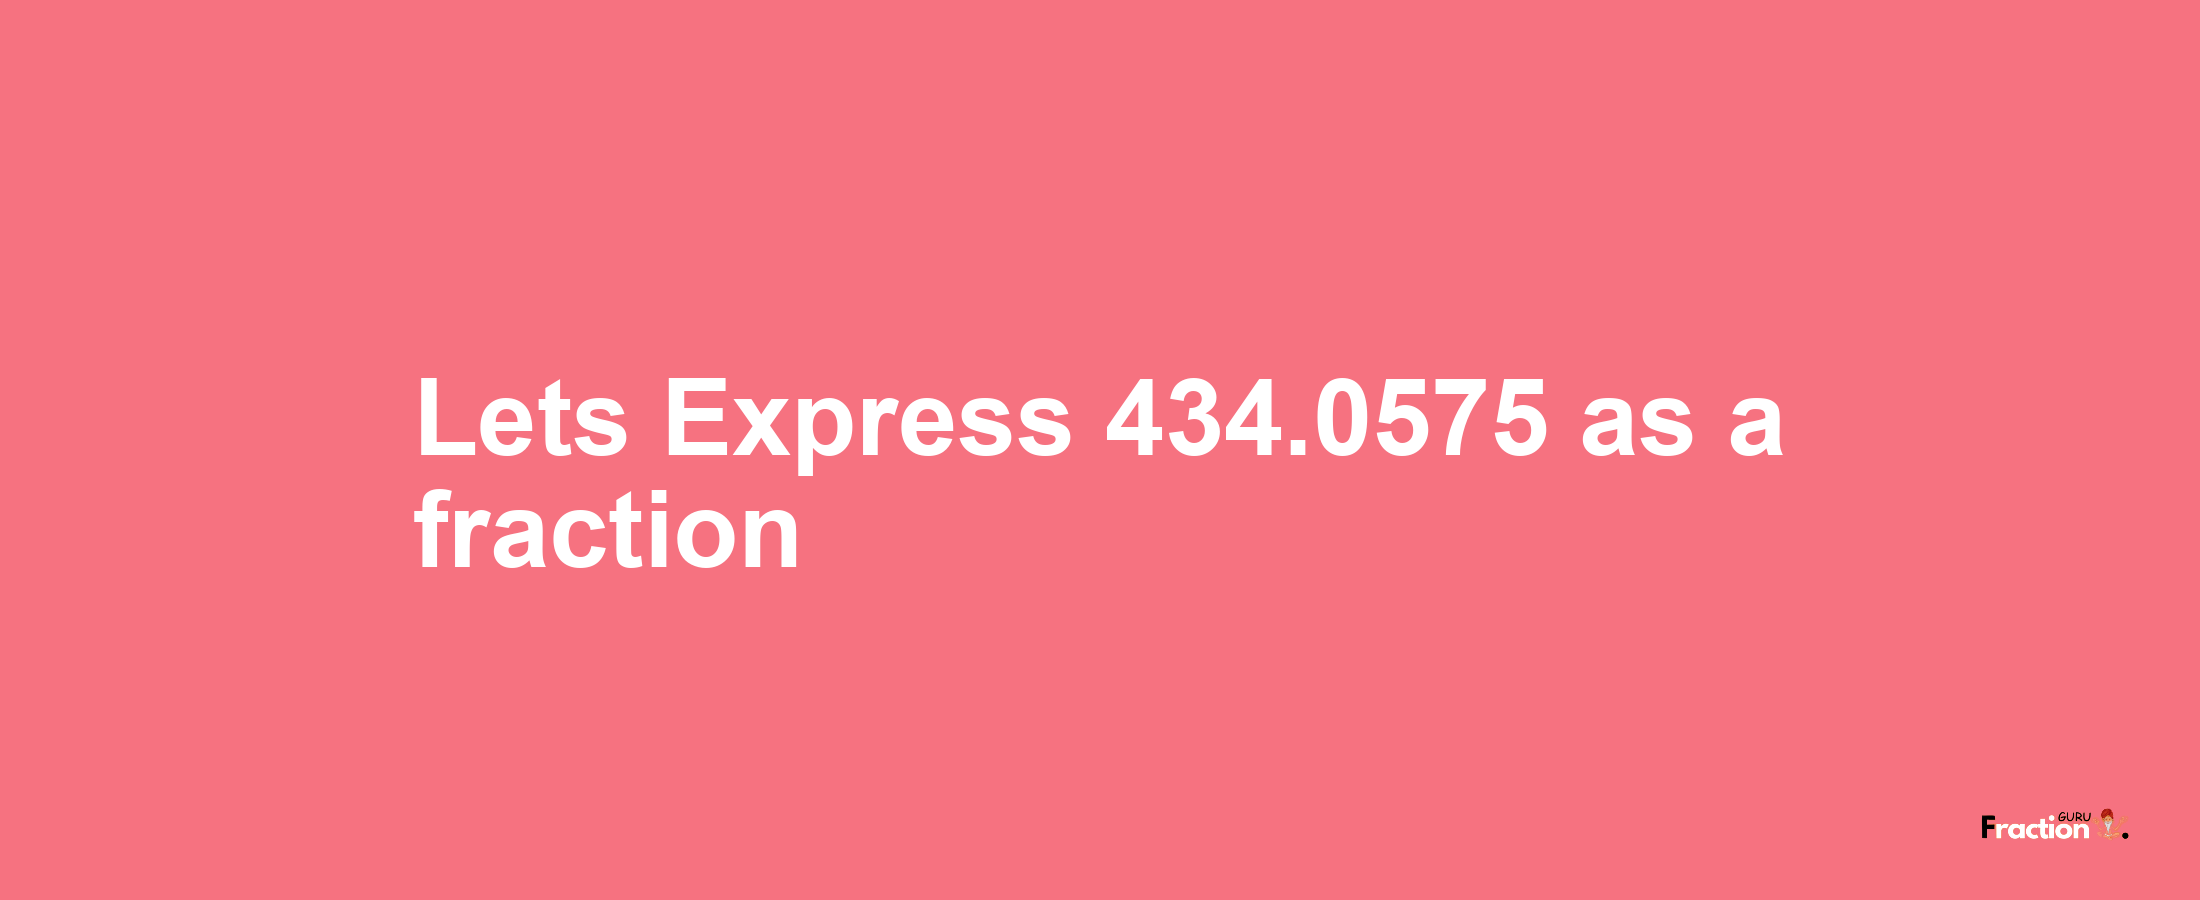 Lets Express 434.0575 as afraction